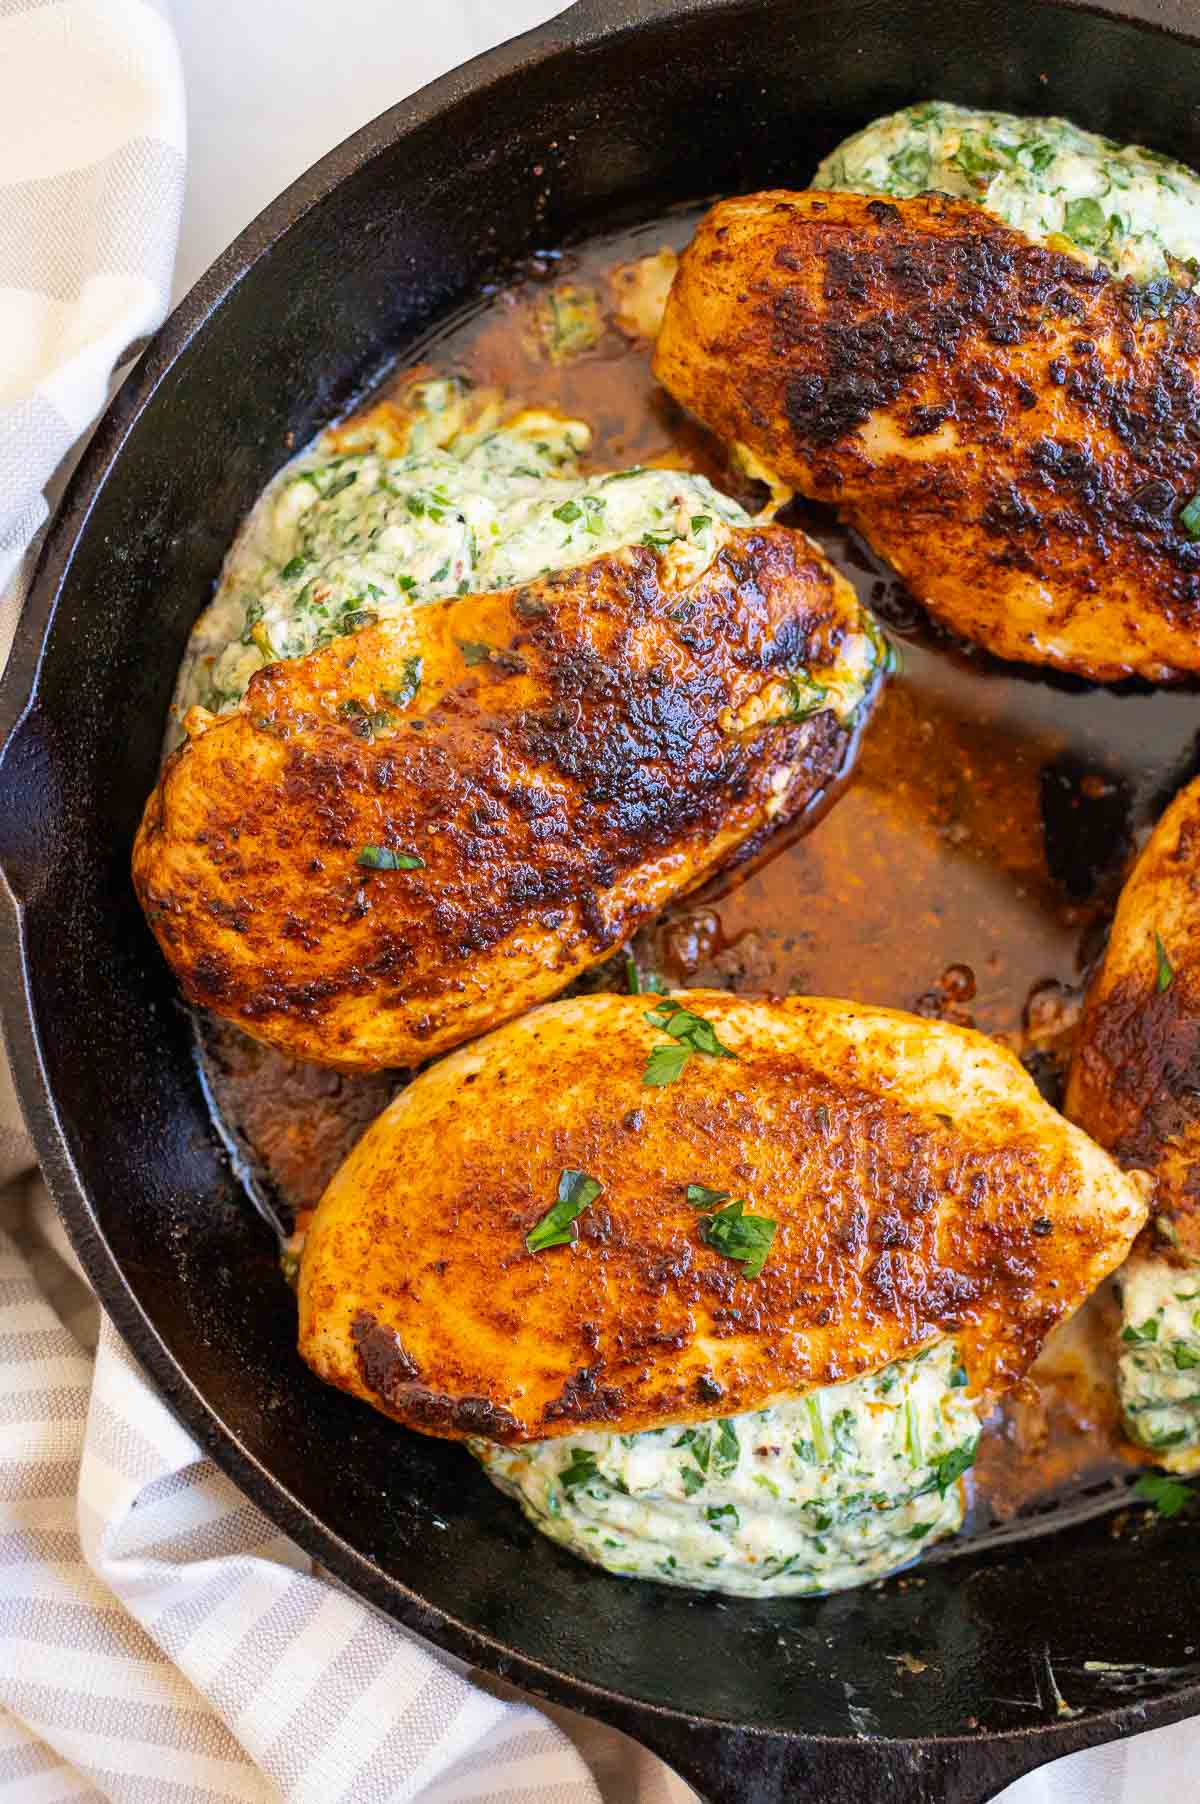 Spinach stuffed chicken breasts in cast iron skillet.